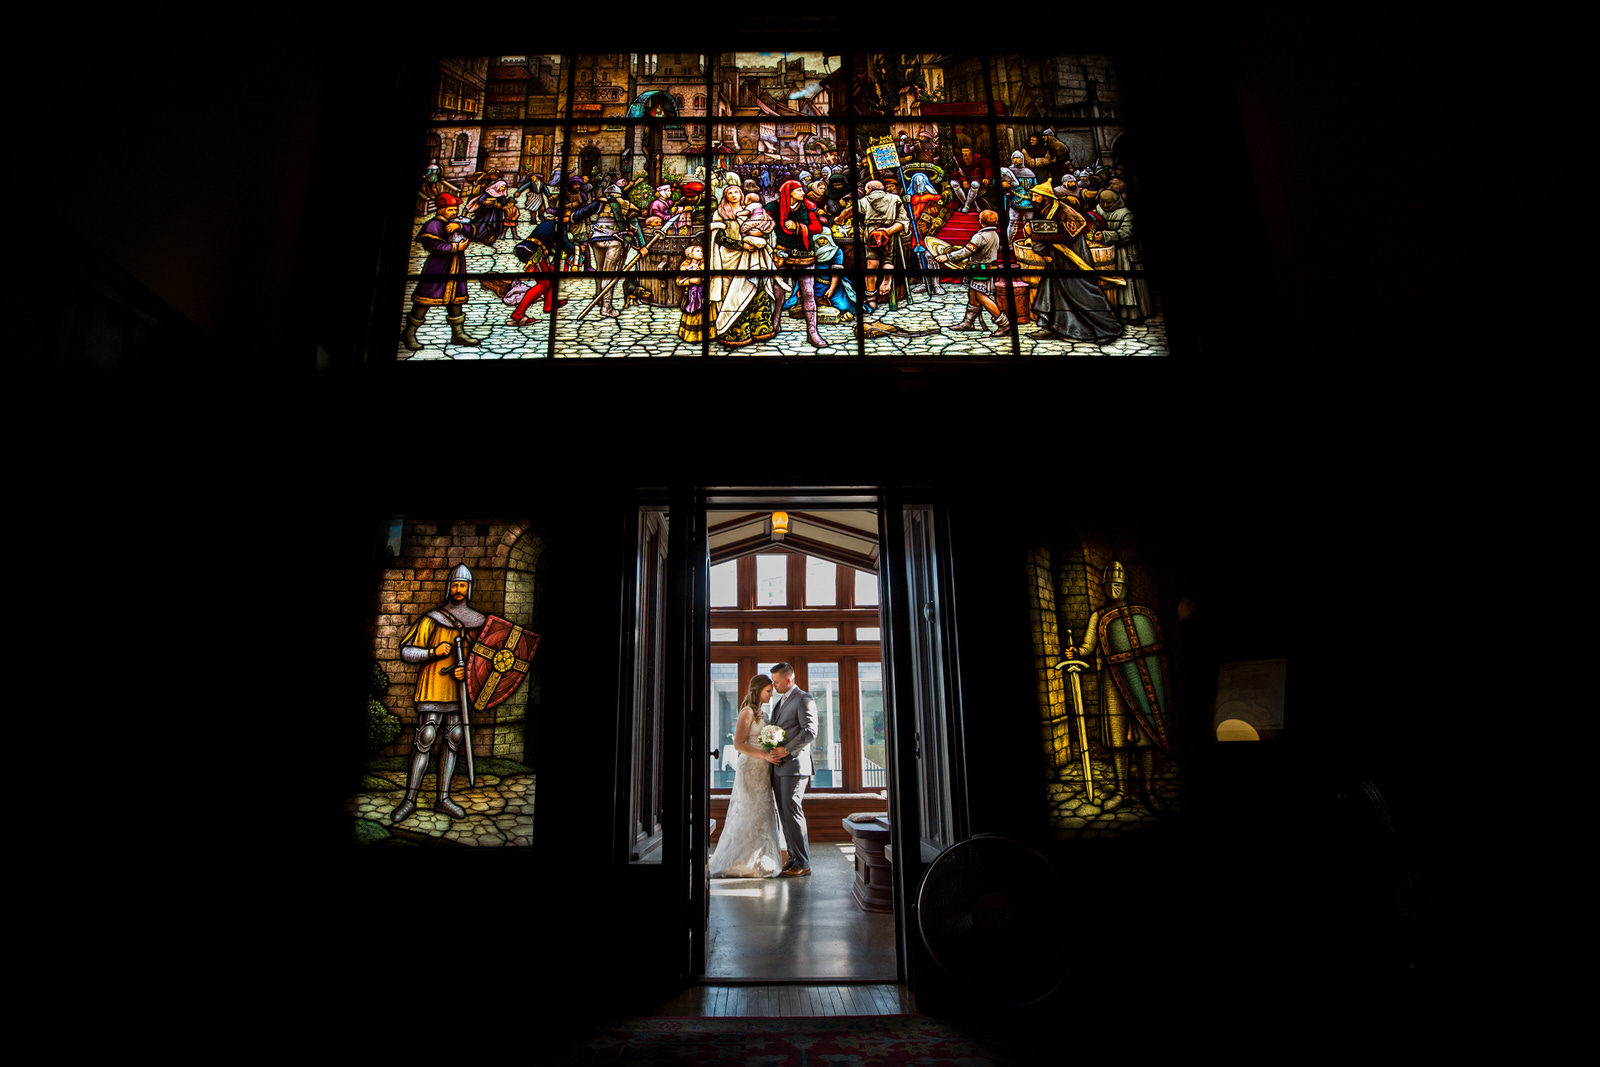 American Swedish Institute Wedding couple under stained glass